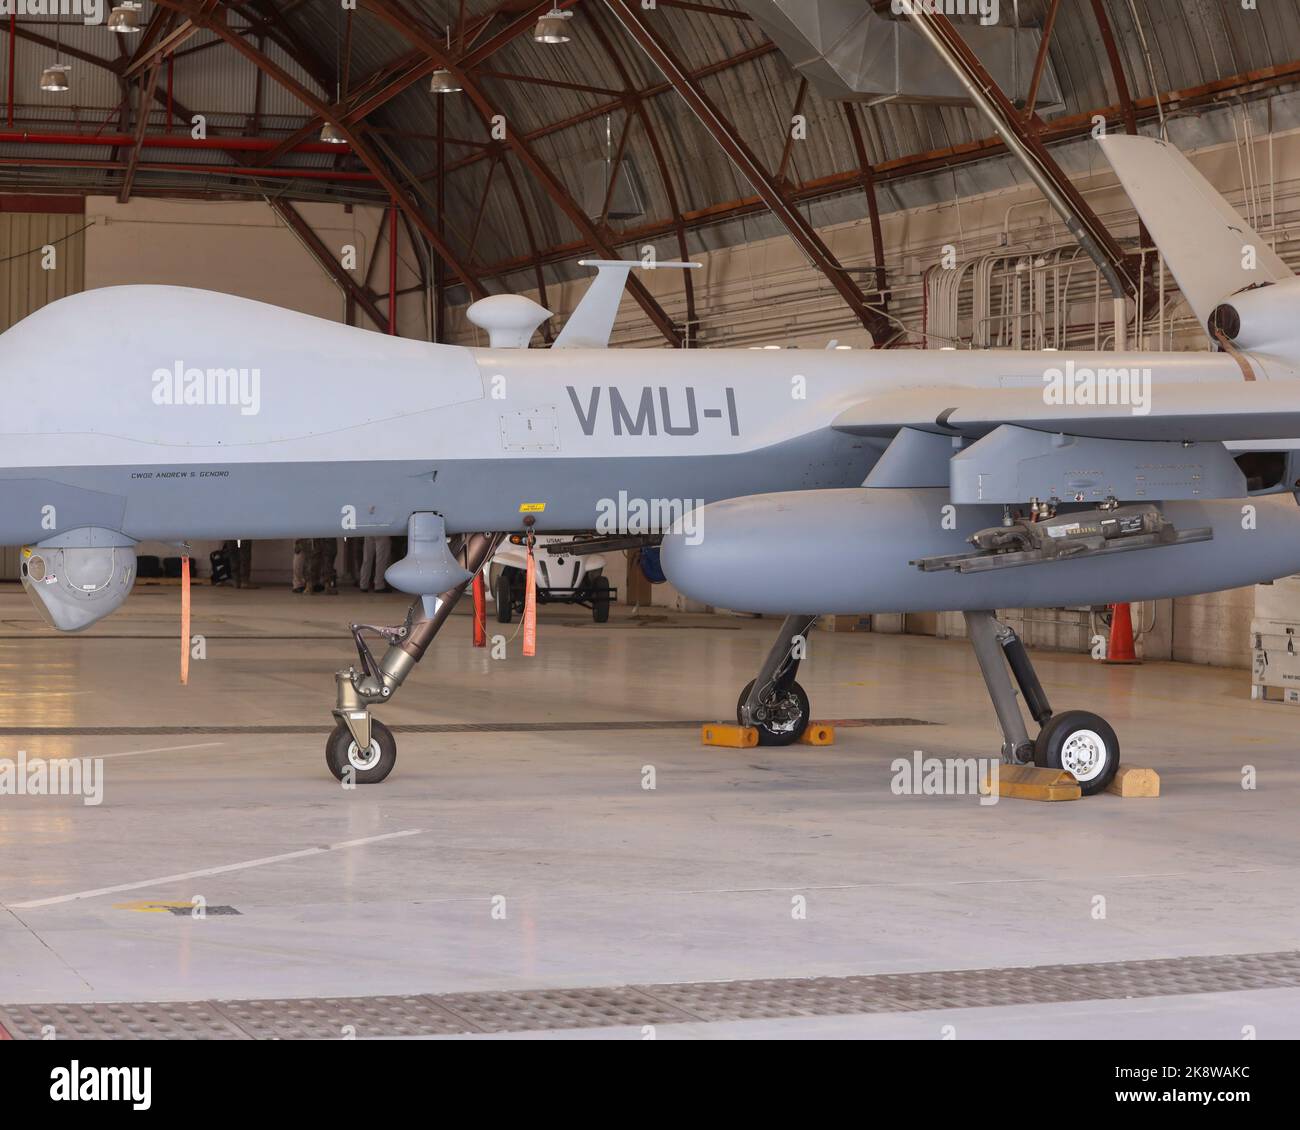 The MQ-9A Reaper with Marine Unmanned Aerial Vehicle Squadron (VMU) 1, 3rd Marine Aircraft Wing, is prepared for disassembly inside a hangar at Marine Corps Air Station (MCAS) Yuma, Arizona, Sept. 13, 2022. The disassembly, transport, and reassembly of the platform between MCAS Yuma and MCAS Miramar via a U.S. Marine Corps KC-130J Hercules aircraft served as a proof of concept for the Reaper's rapid, expeditionary deployment capacity. (U.S. Marine Corps photo by Lance Cpl. Jade Venegas) Stock Photo